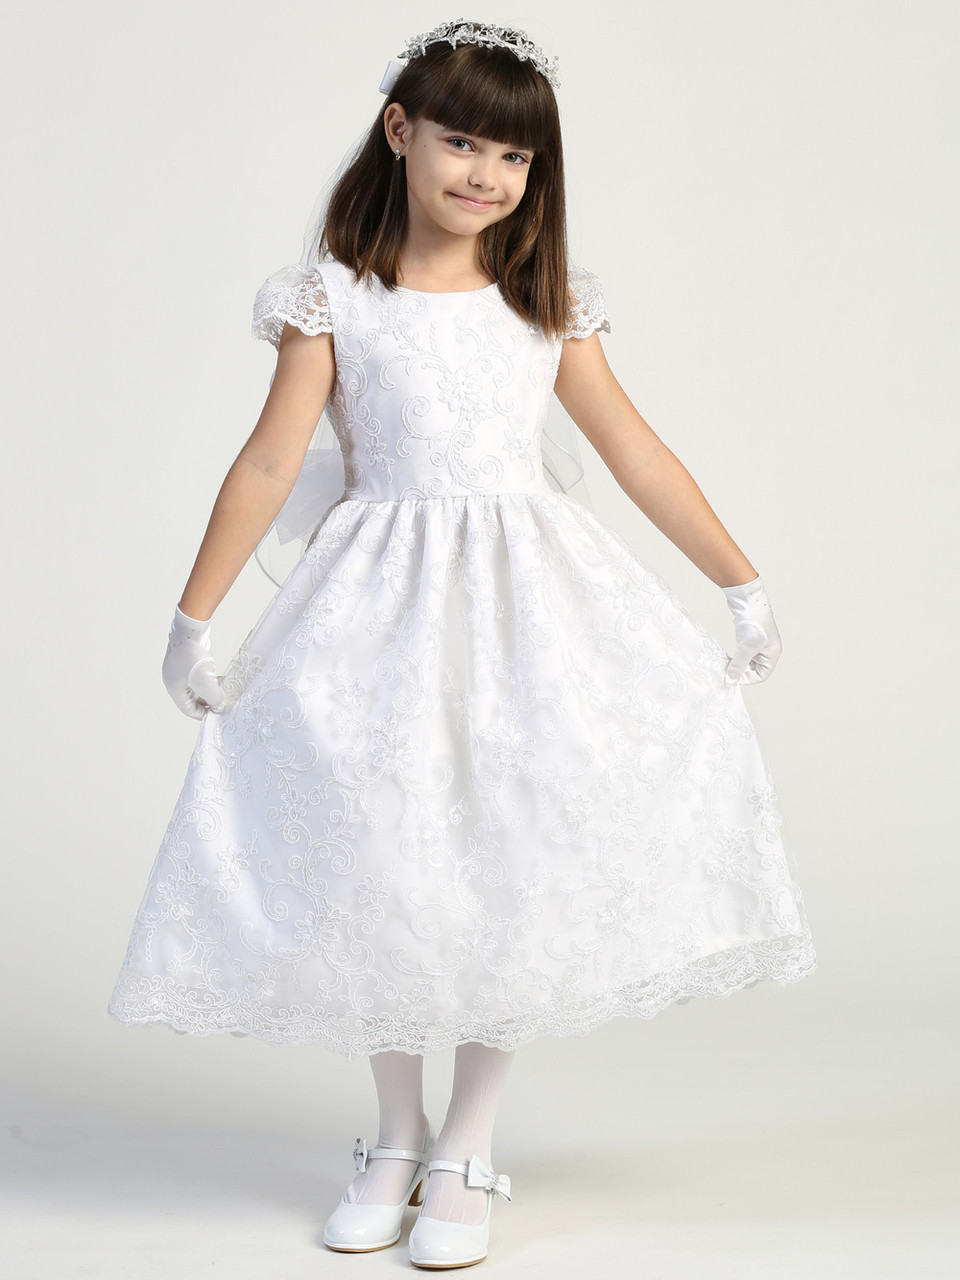 HEVECI White First Holy Communion Dress Tea Length Flower Girl Dresses with Sleeves 7-16 Princess